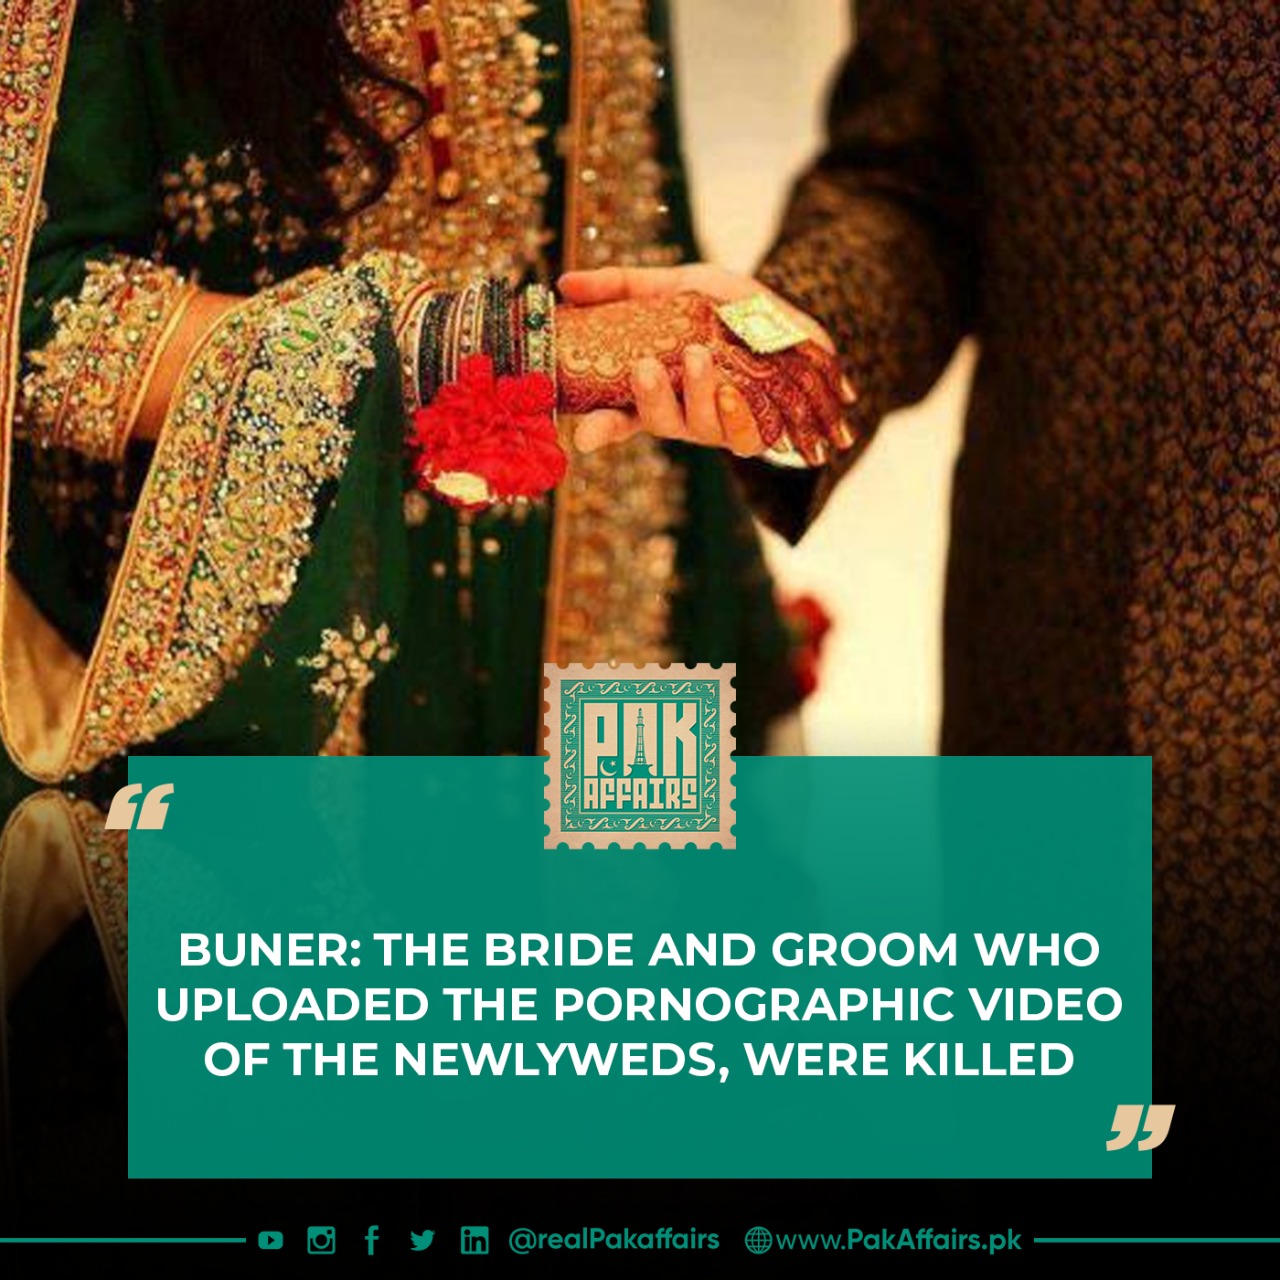 Buner: The bride and groom who uploaded the pornographic video of the newlyweds, were killed